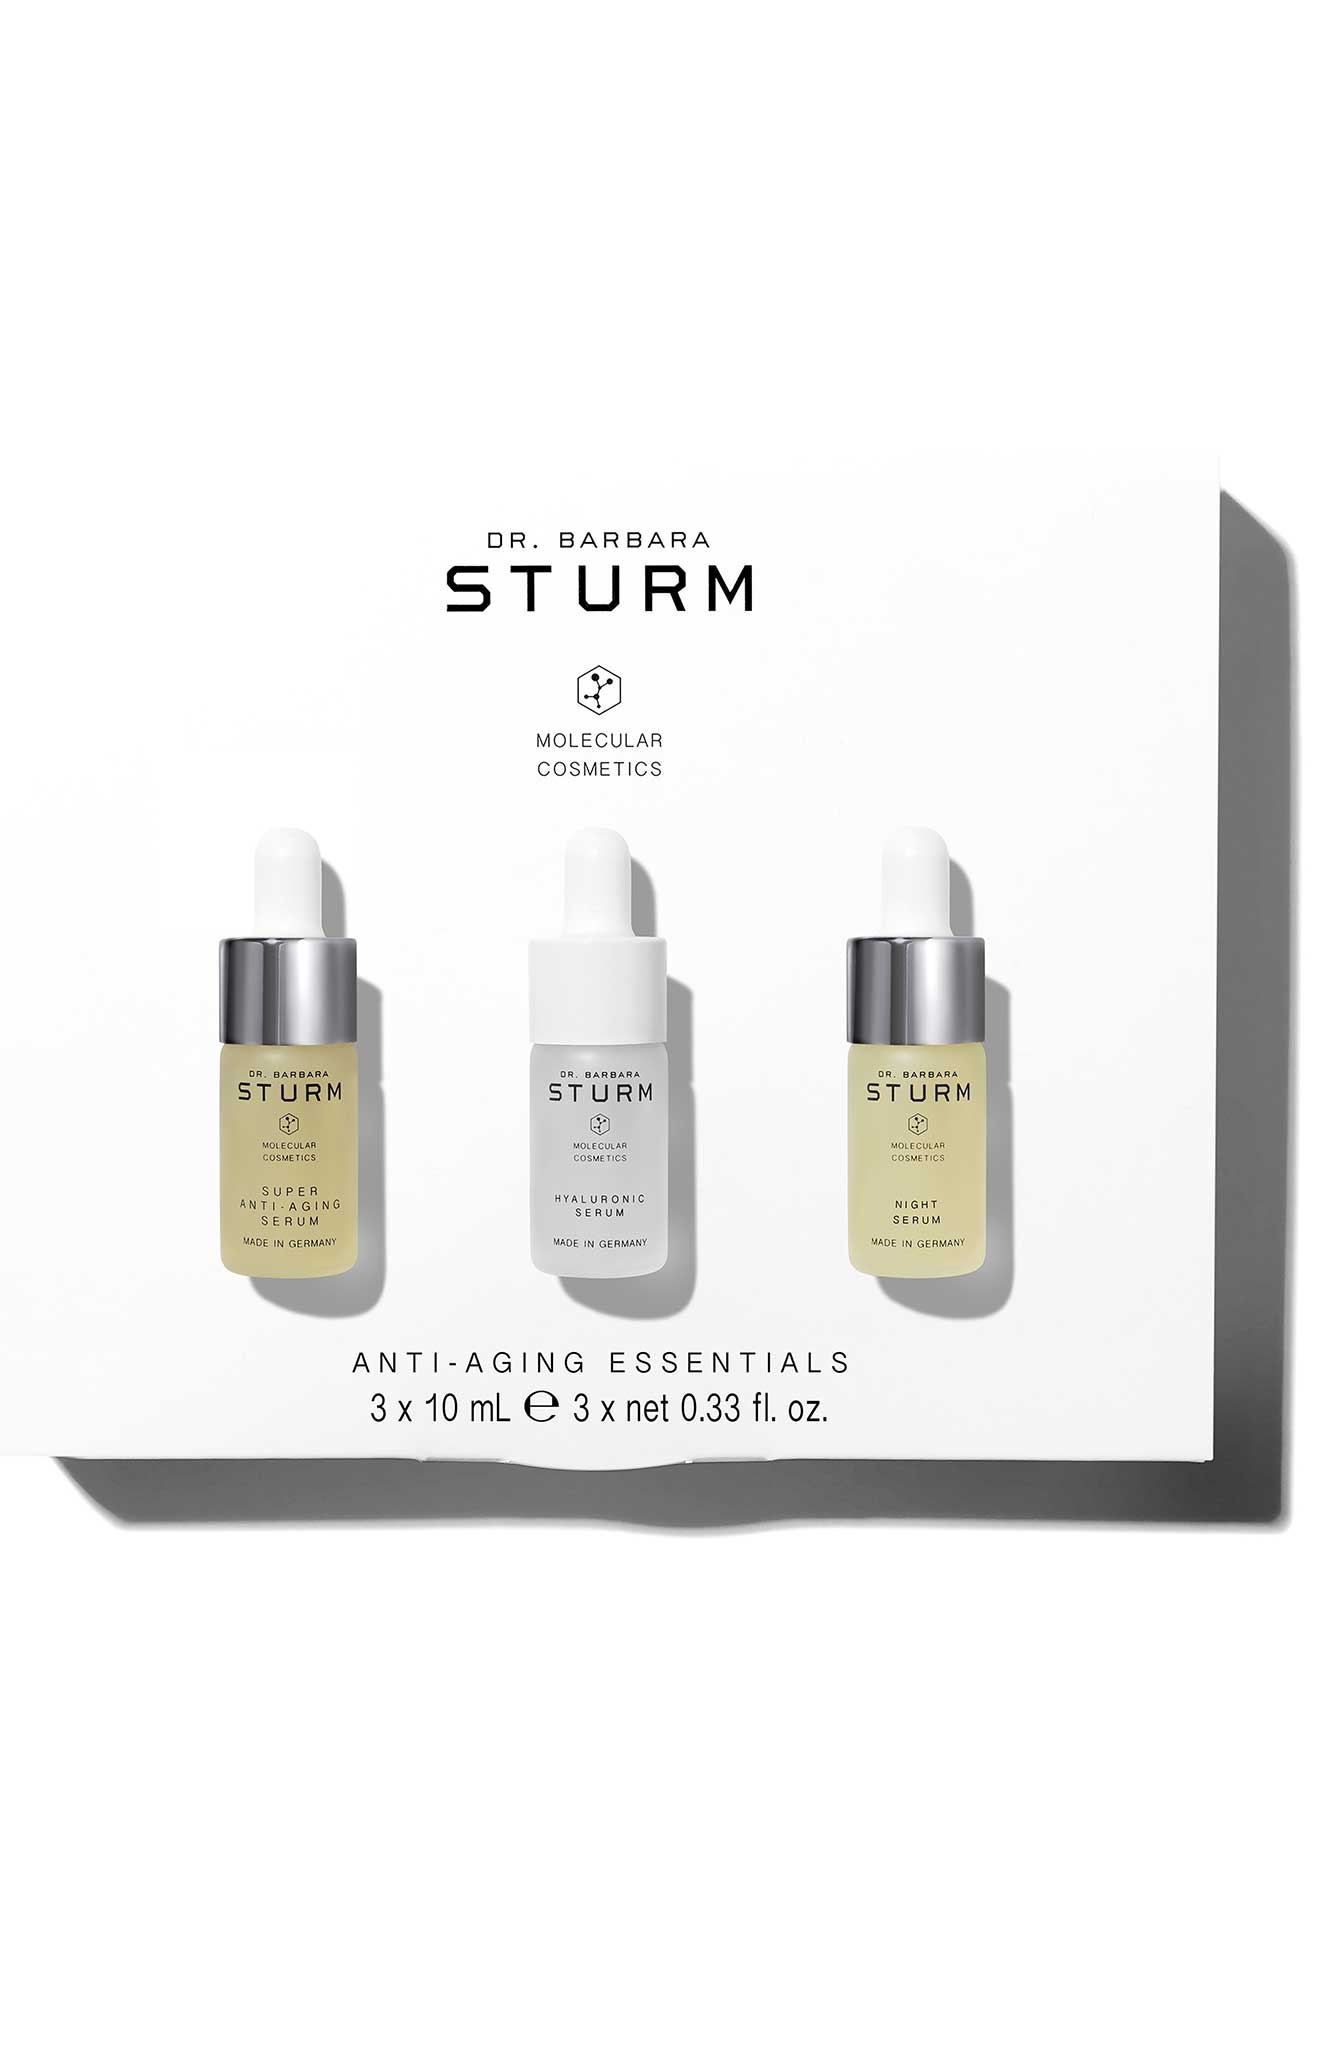 Dr. Barbara Sturm Anti-Aging Essentials: We may not all be so lucky to get the famous “vampire facial” from Dr. Sturm, but we can still get the Sturm glow! The night serum regenerates, smooths, and by mixing in the super anti-aging serum with the hyaluronic serum, ensures skin looks its best.